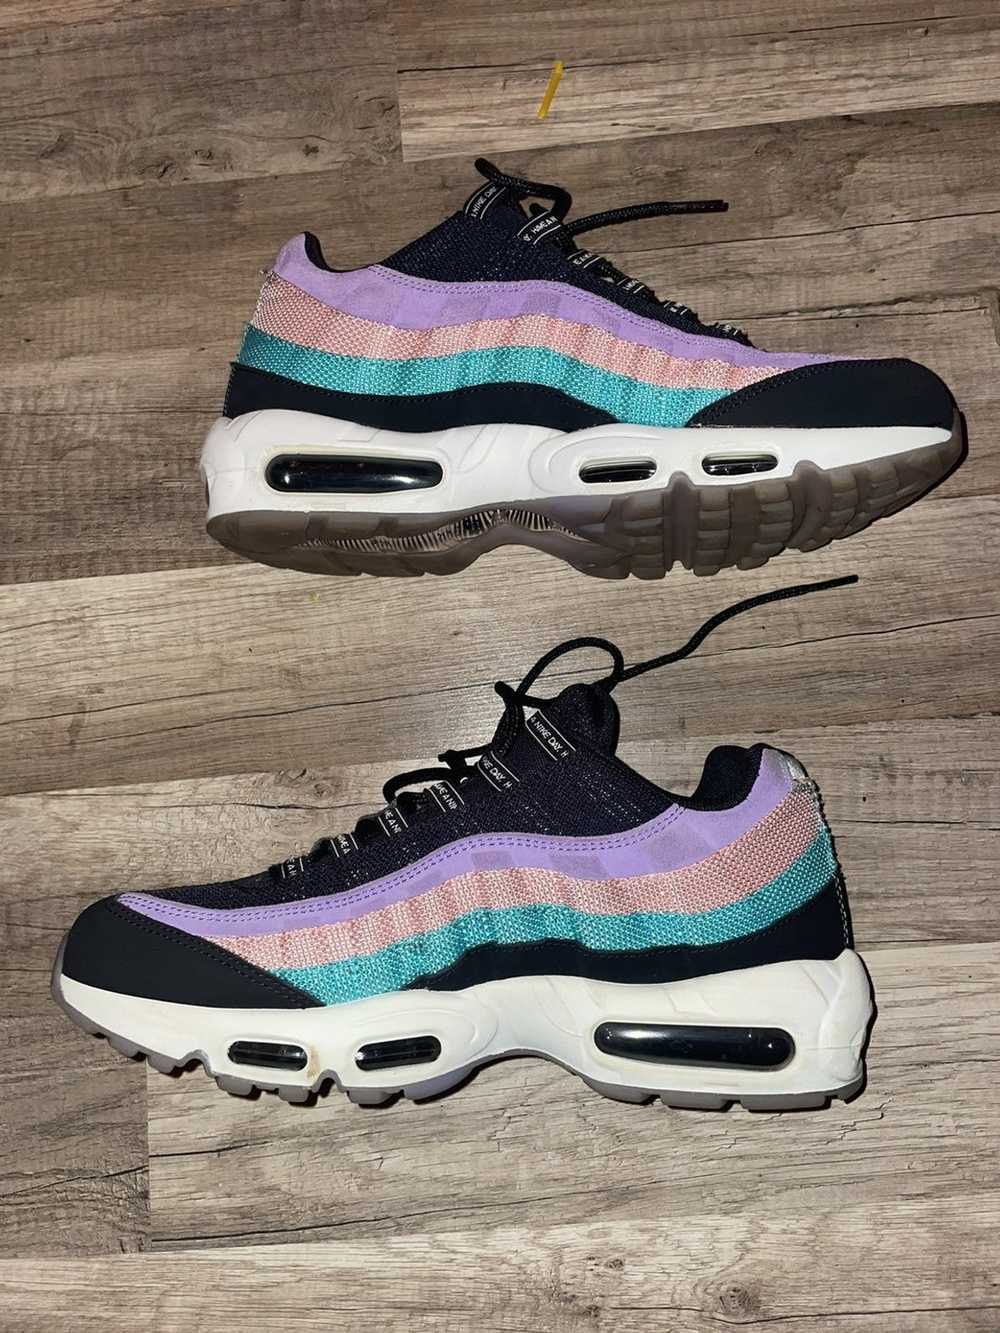 Nike Air Max 95 Have A Nike Day 2019 - image 2